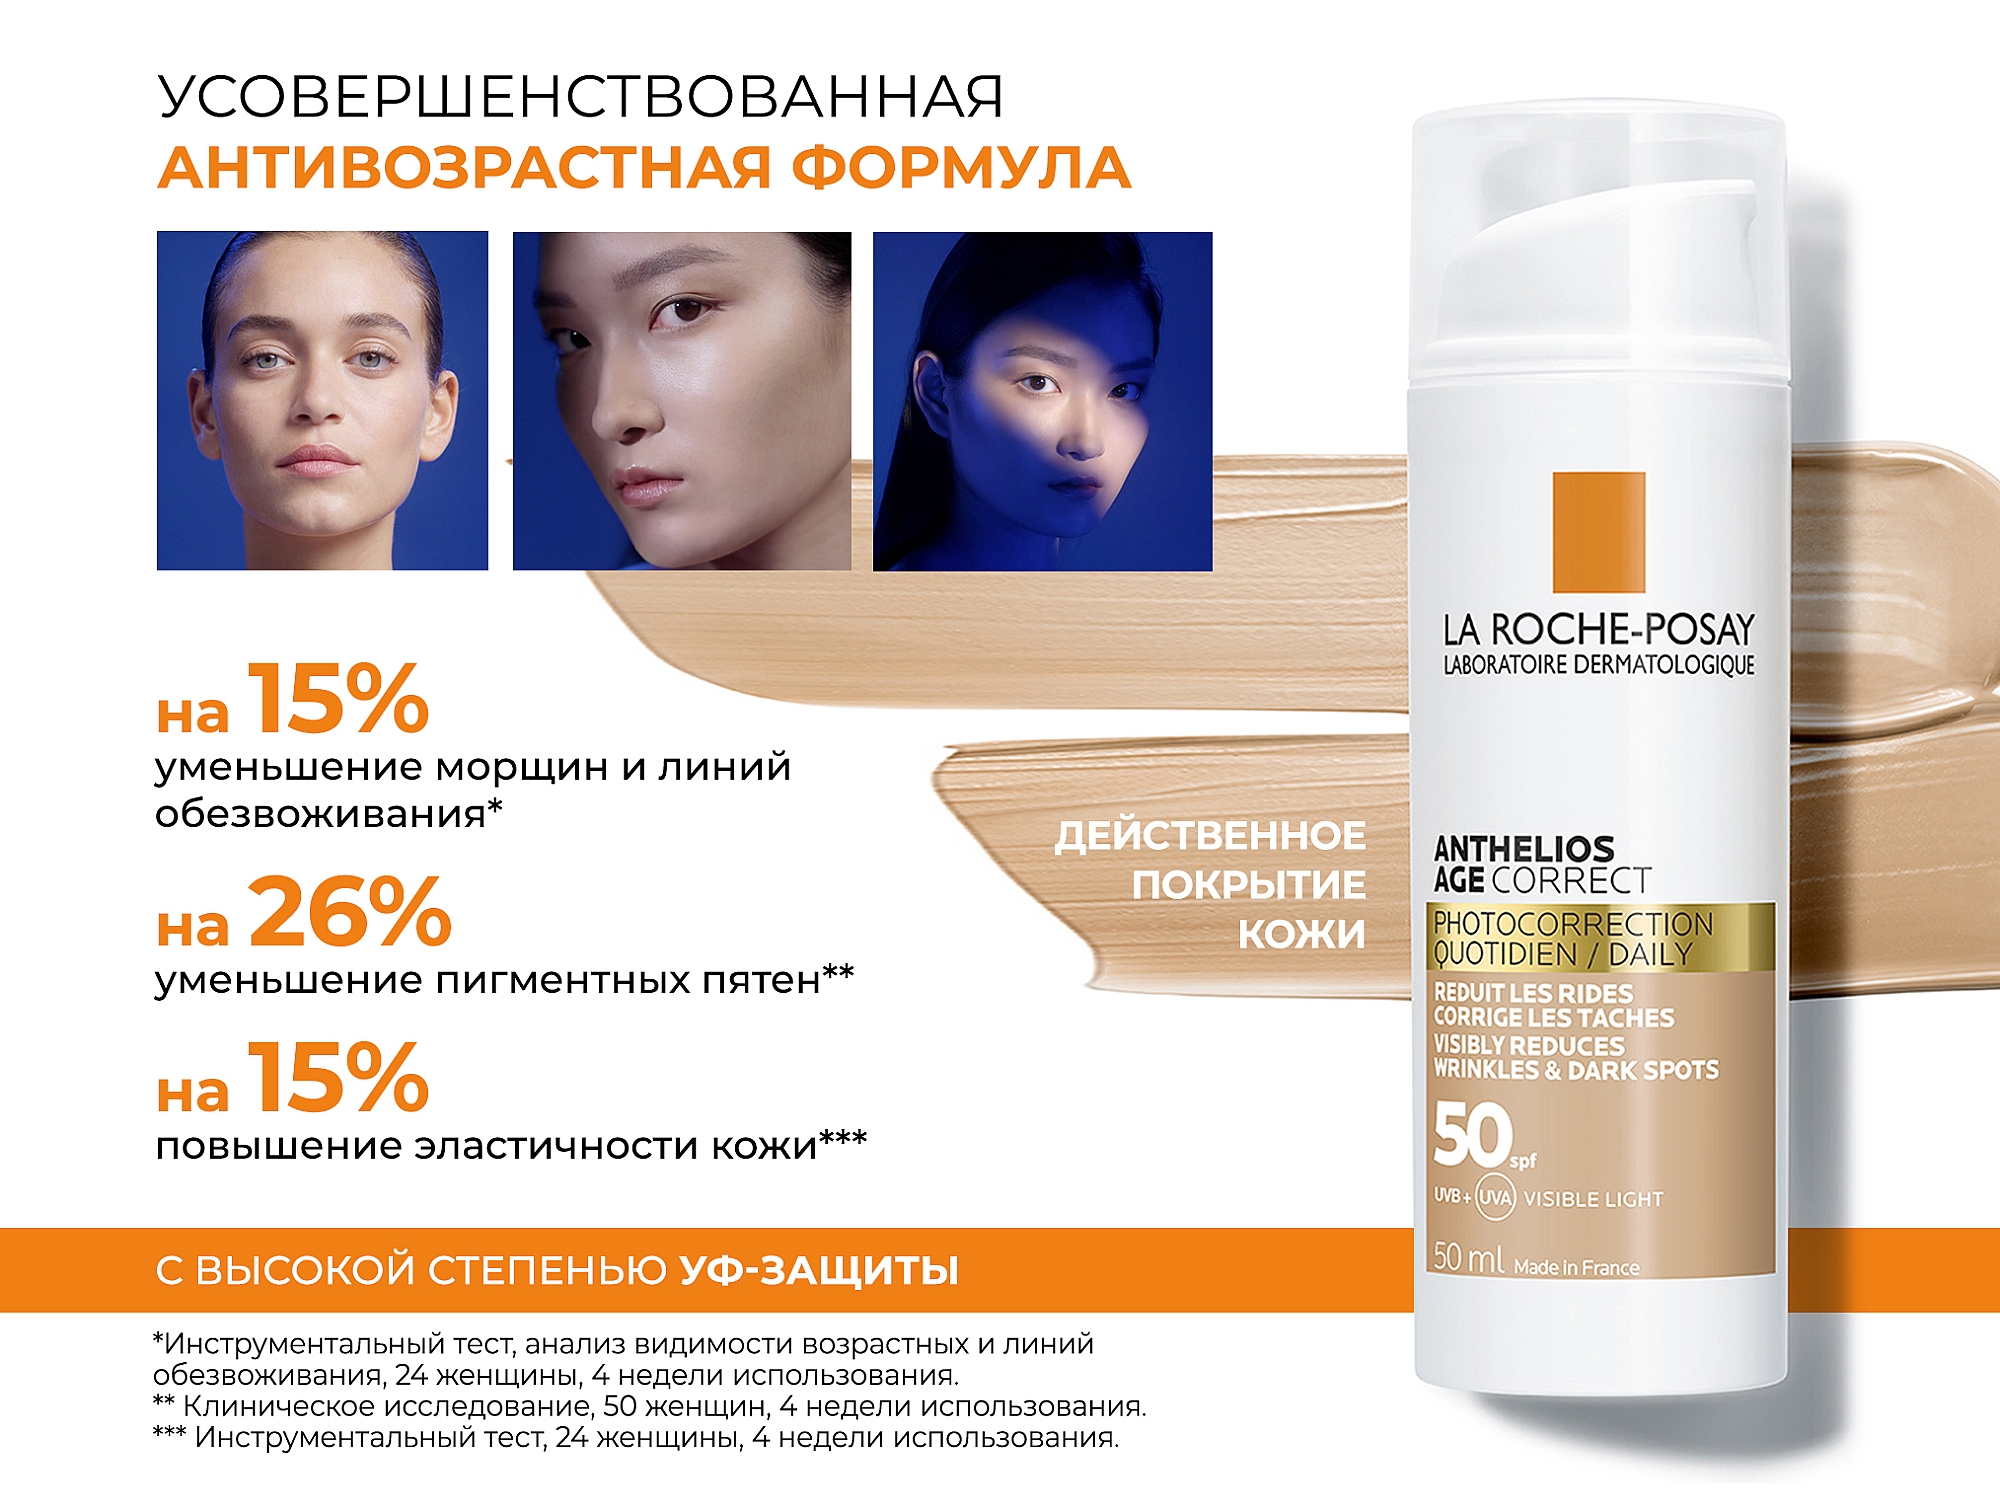 La Roche-Posay Anthelios Age Correct SPF50 Tinted